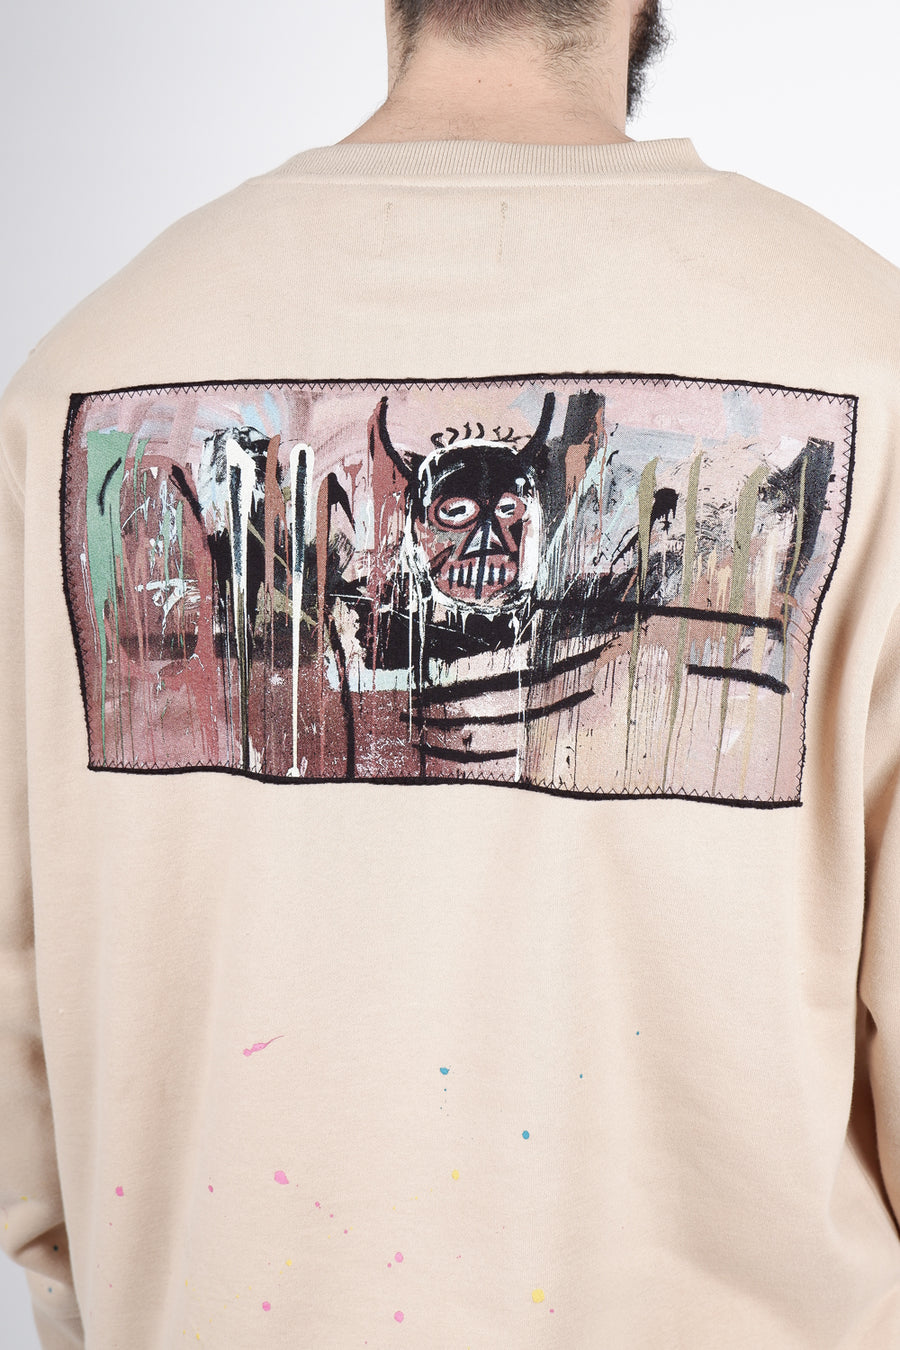 Buy the ABE Basquiat Devil Sweatshirt Beige in Black at Intro. Spend £50 for free UK delivery. Official stockists. We ship worldwide.